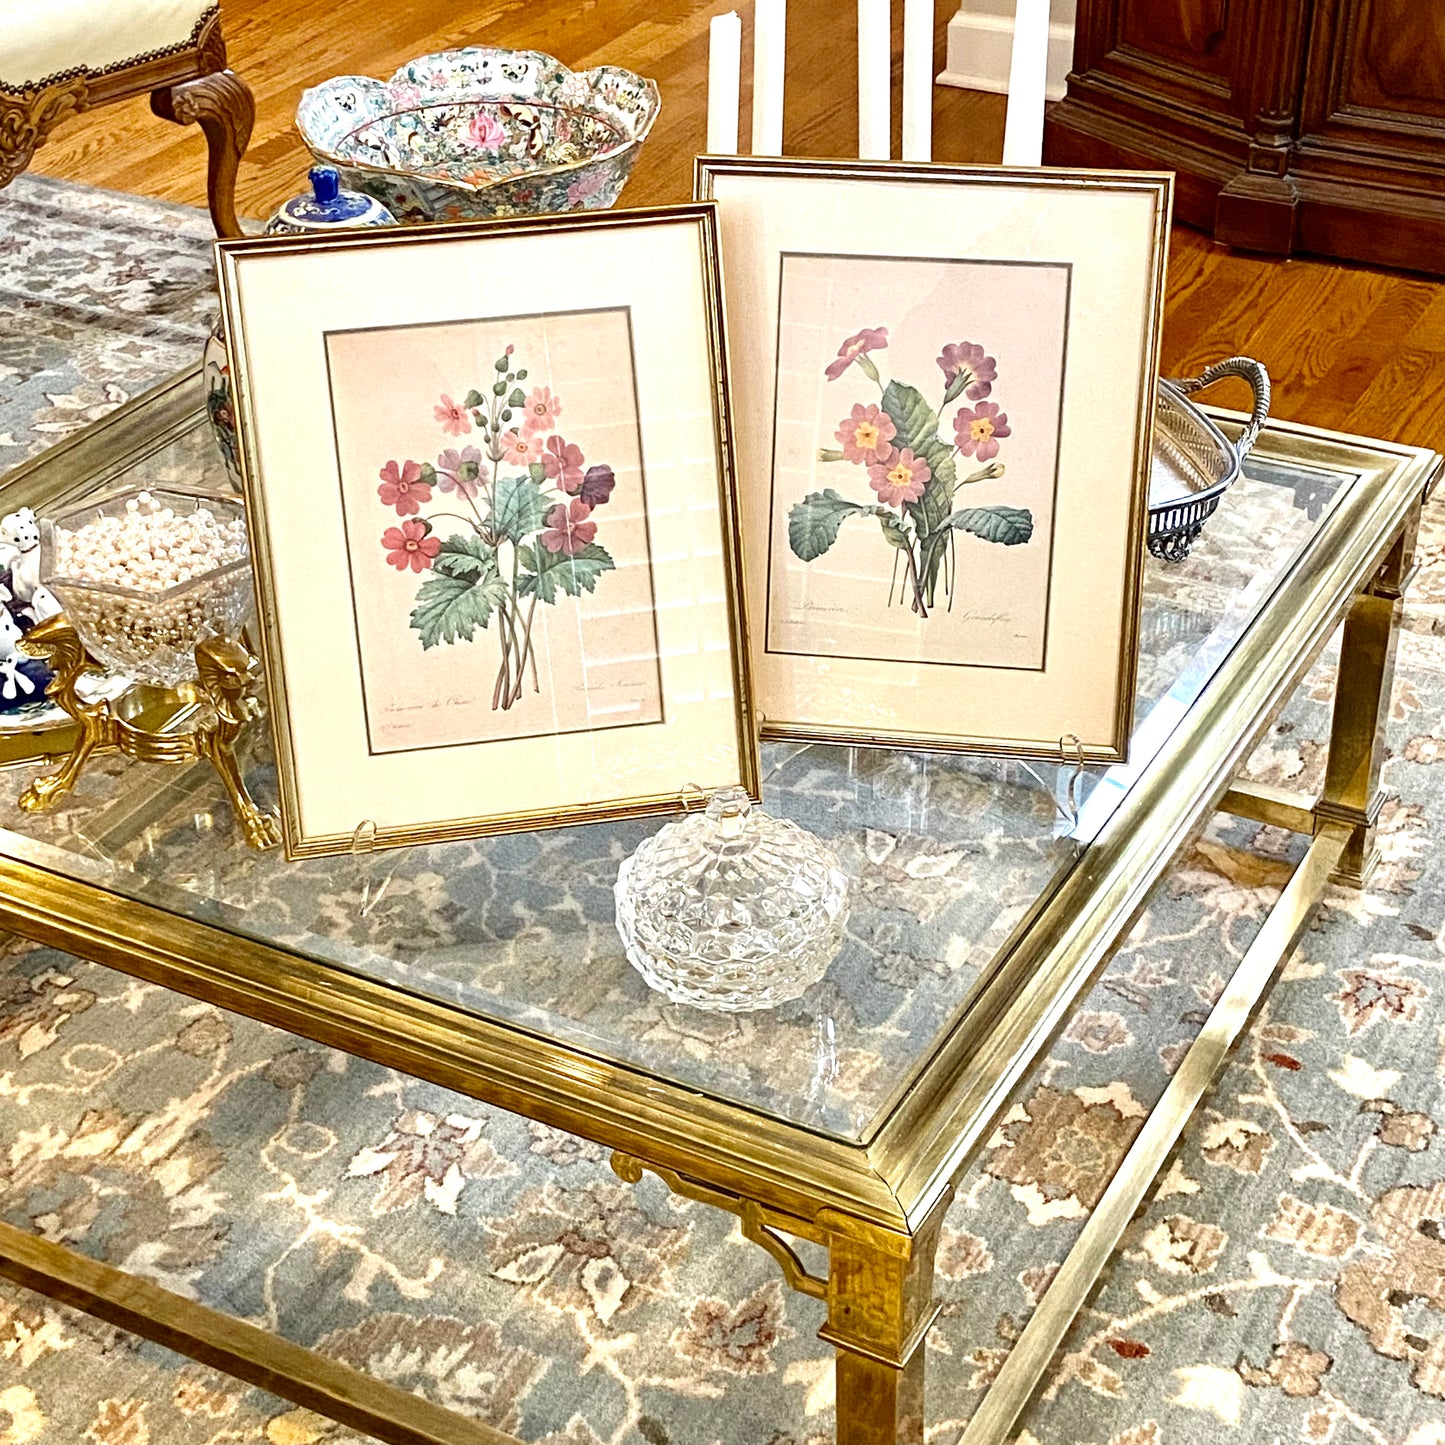 Stunning pair of vintage botanical floral lithograph prints Wall art